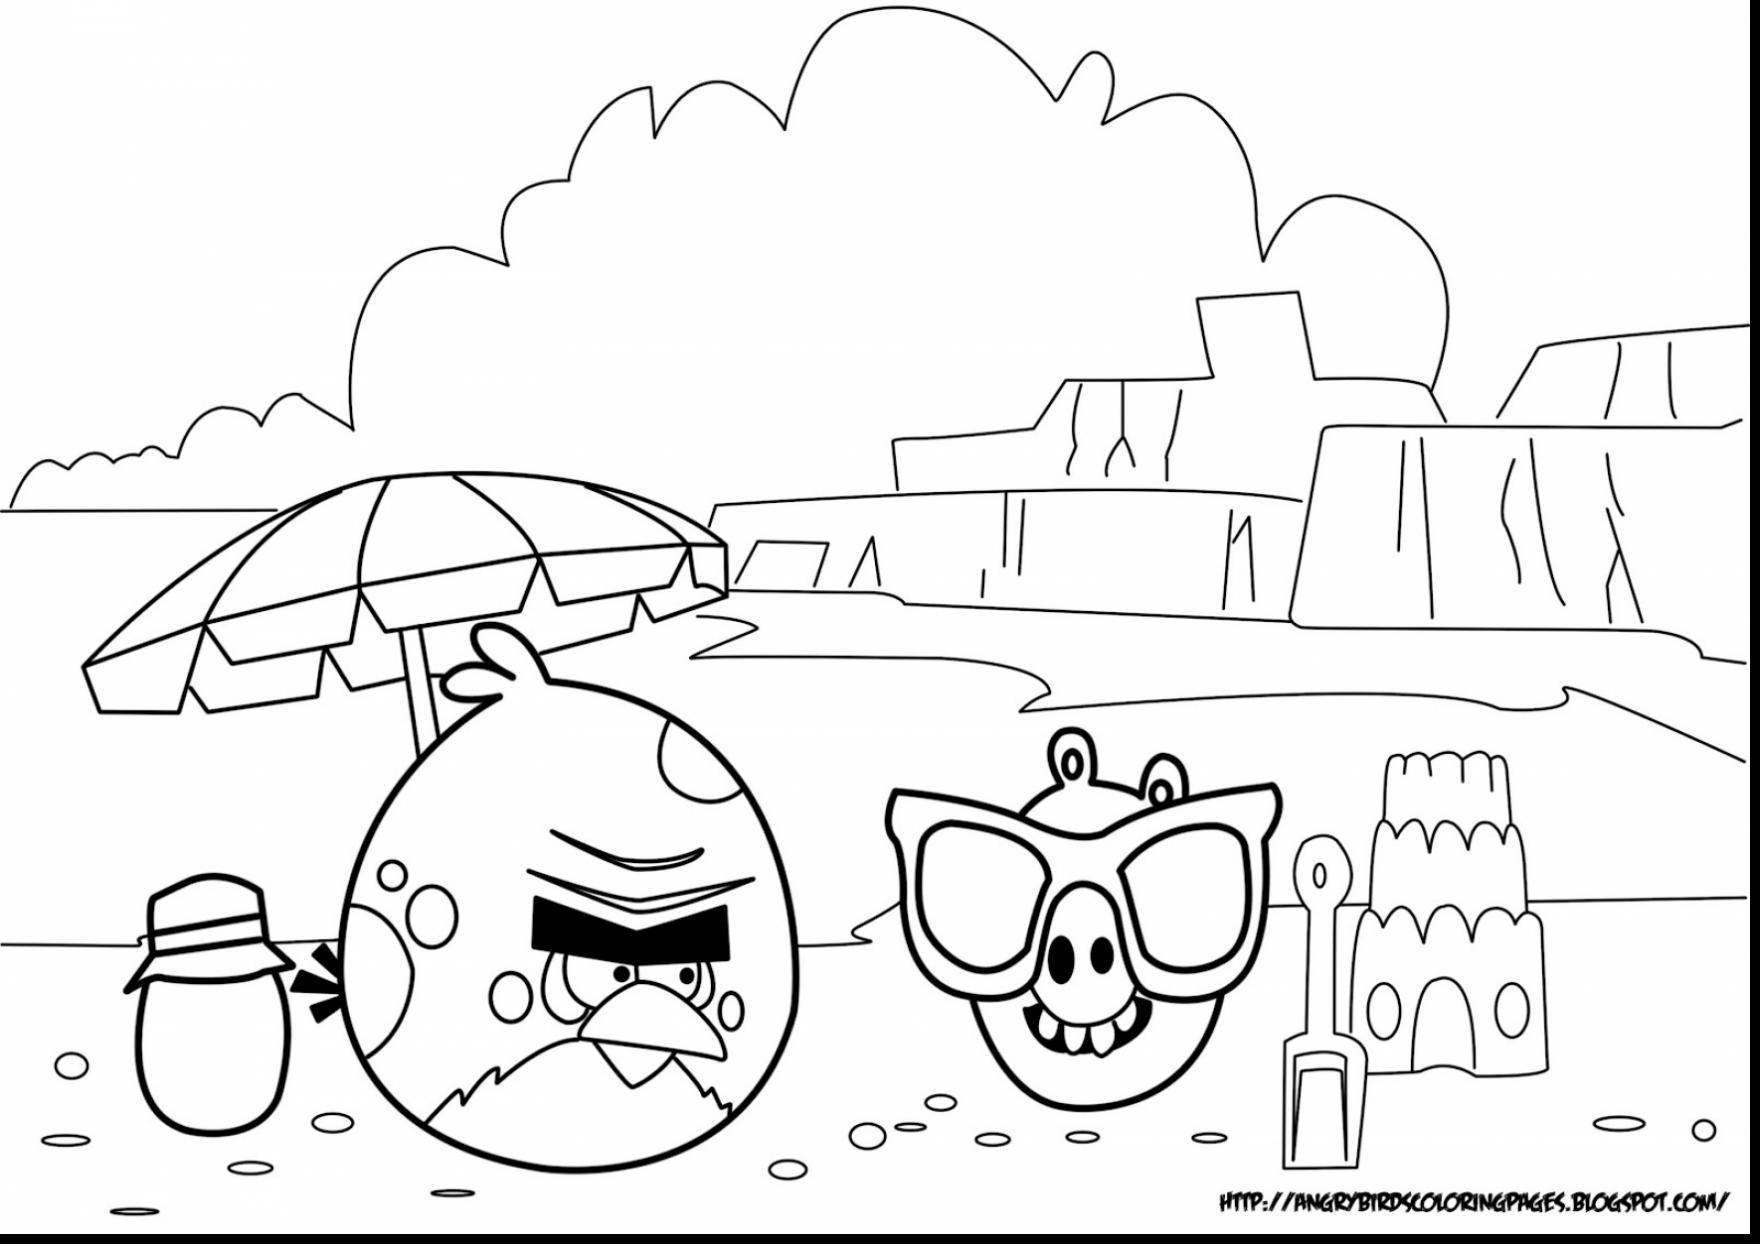 Angry Birds 2 Coloring Pages at GetColorings.com | Free printable ...